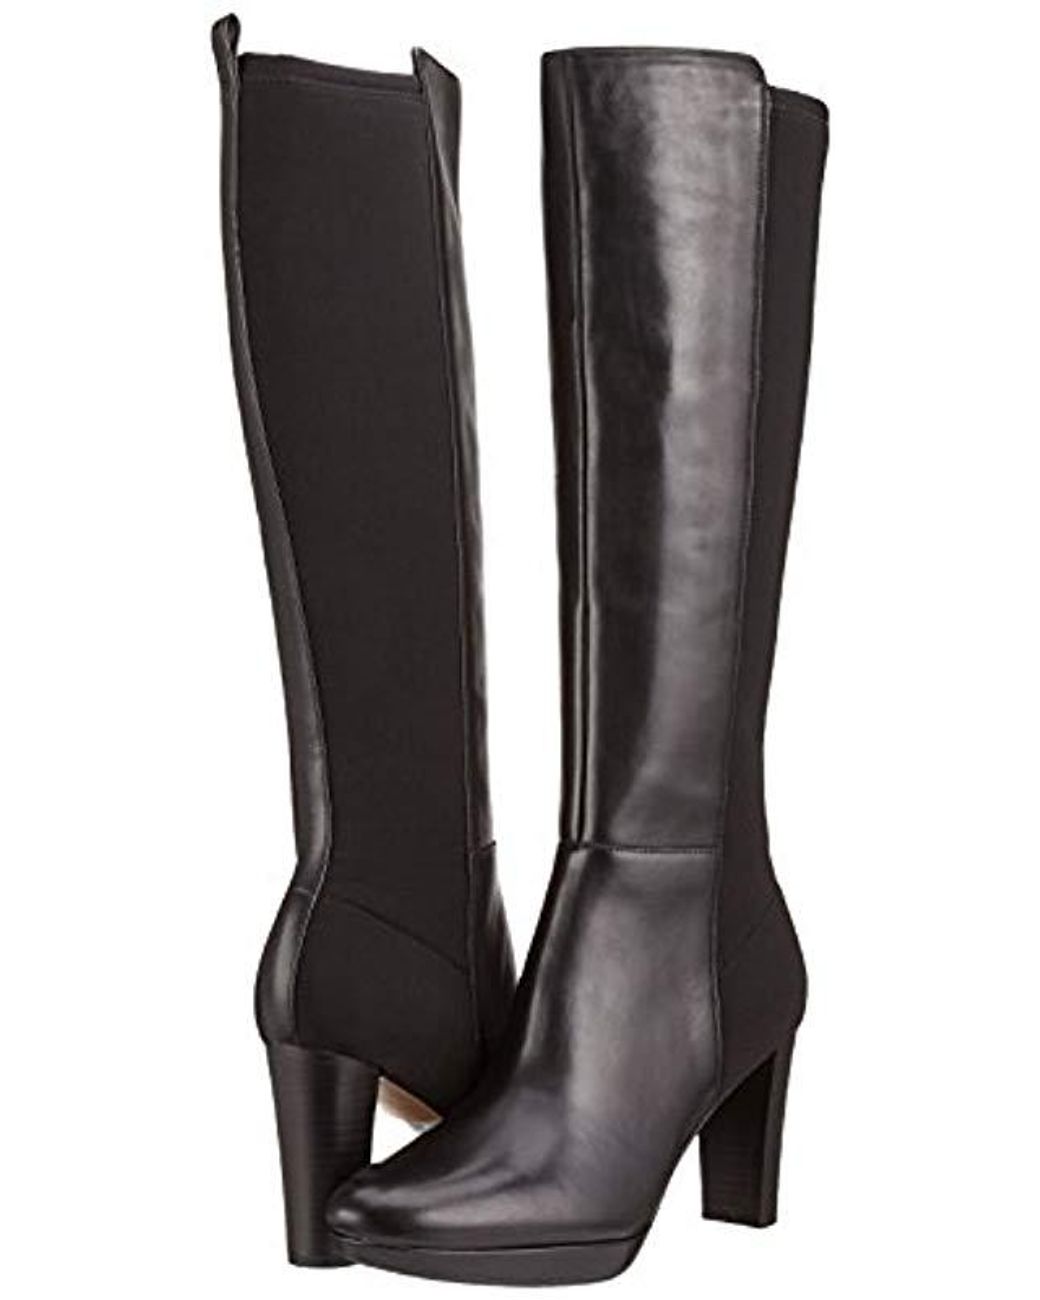 Clarks 's Kendra Glove Long Boots in Black | Lyst UK